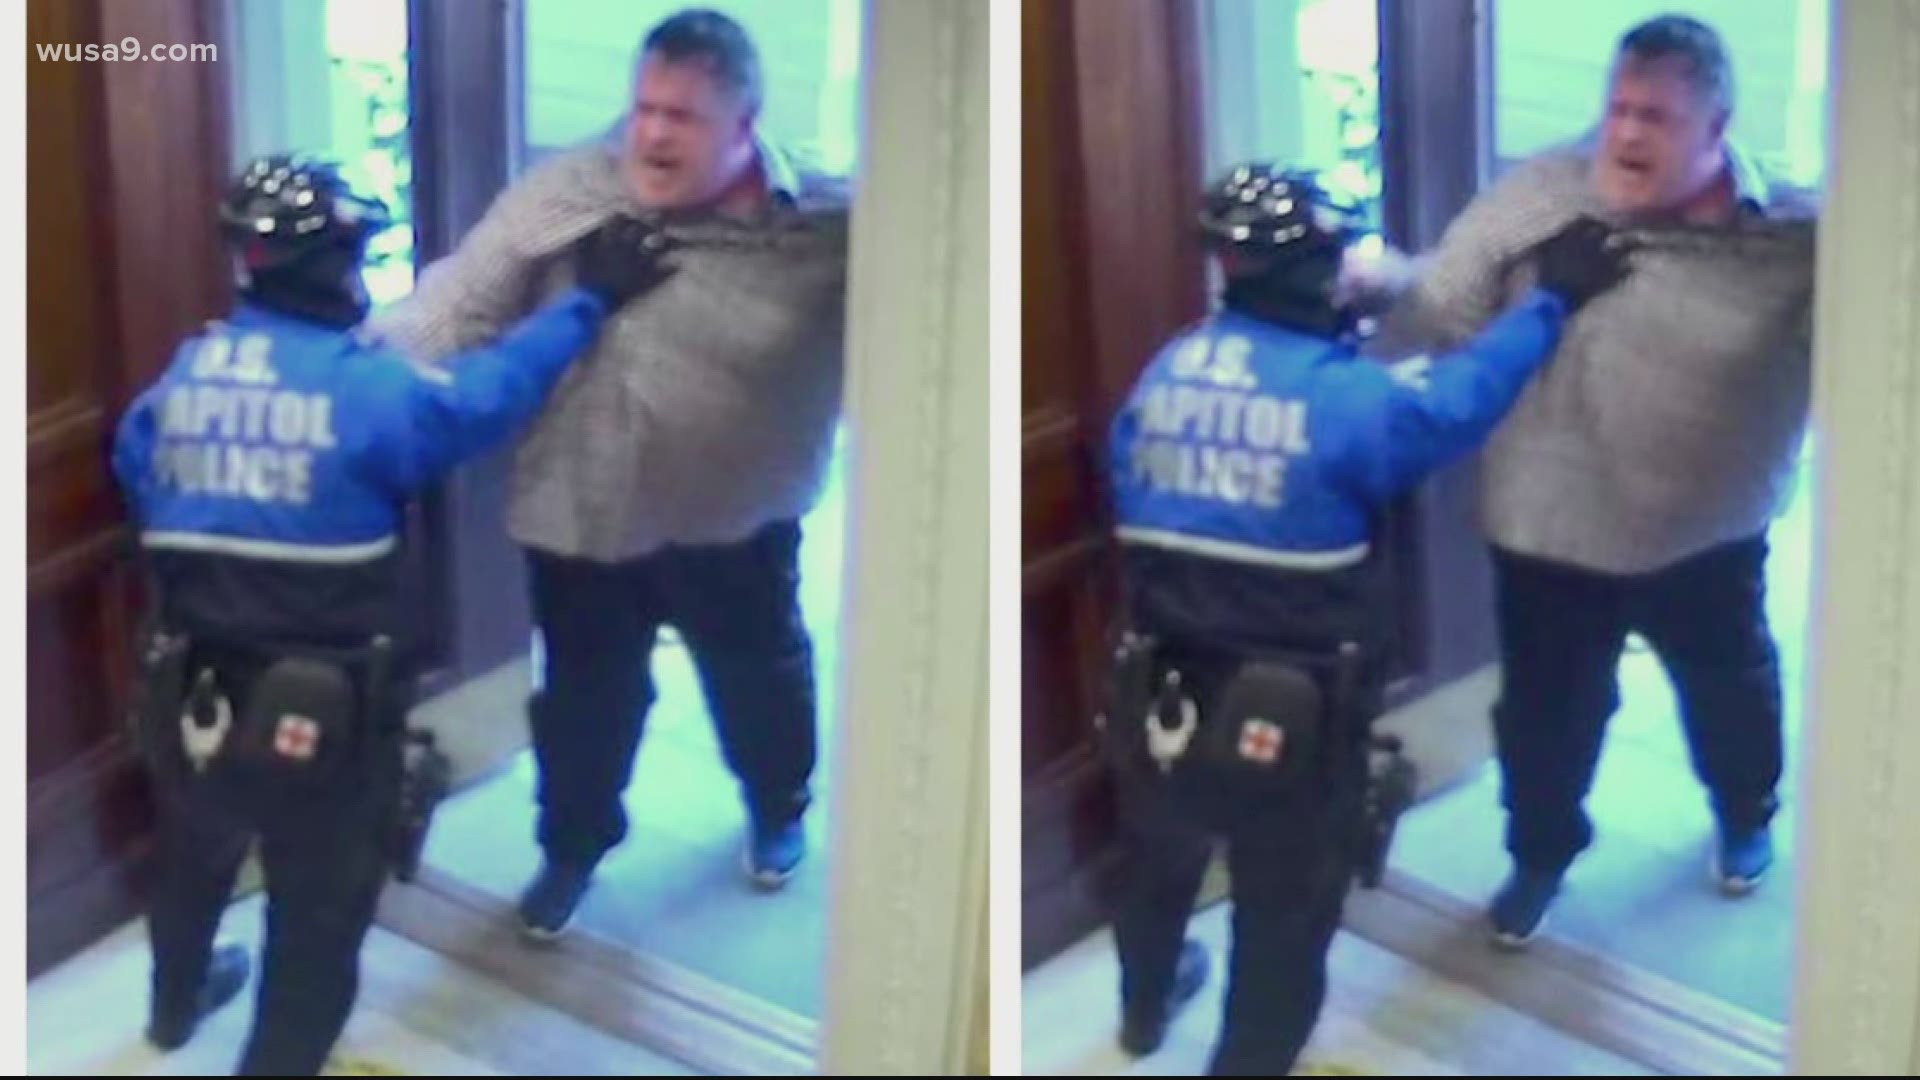 Daniel Egtvedt of Garrett County, Maryland is accused of fighting with officers in the halls of the Capitol. It took several officers to get him out of the capitol.